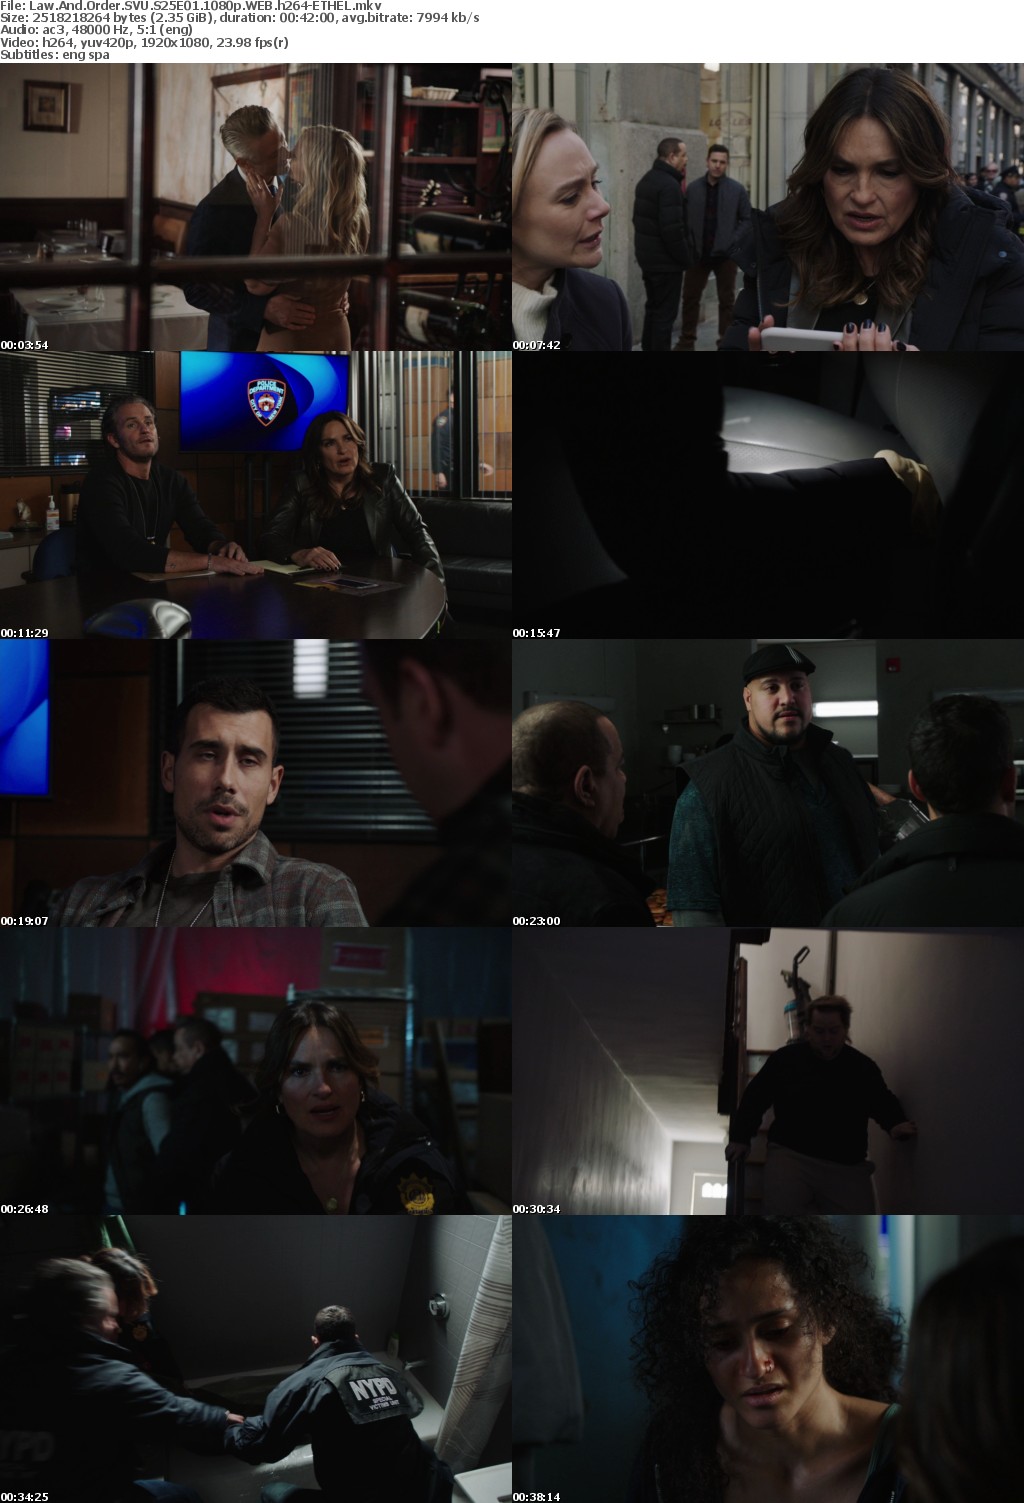 Law And Order SVU S25E01 1080p WEB h264-ETHEL